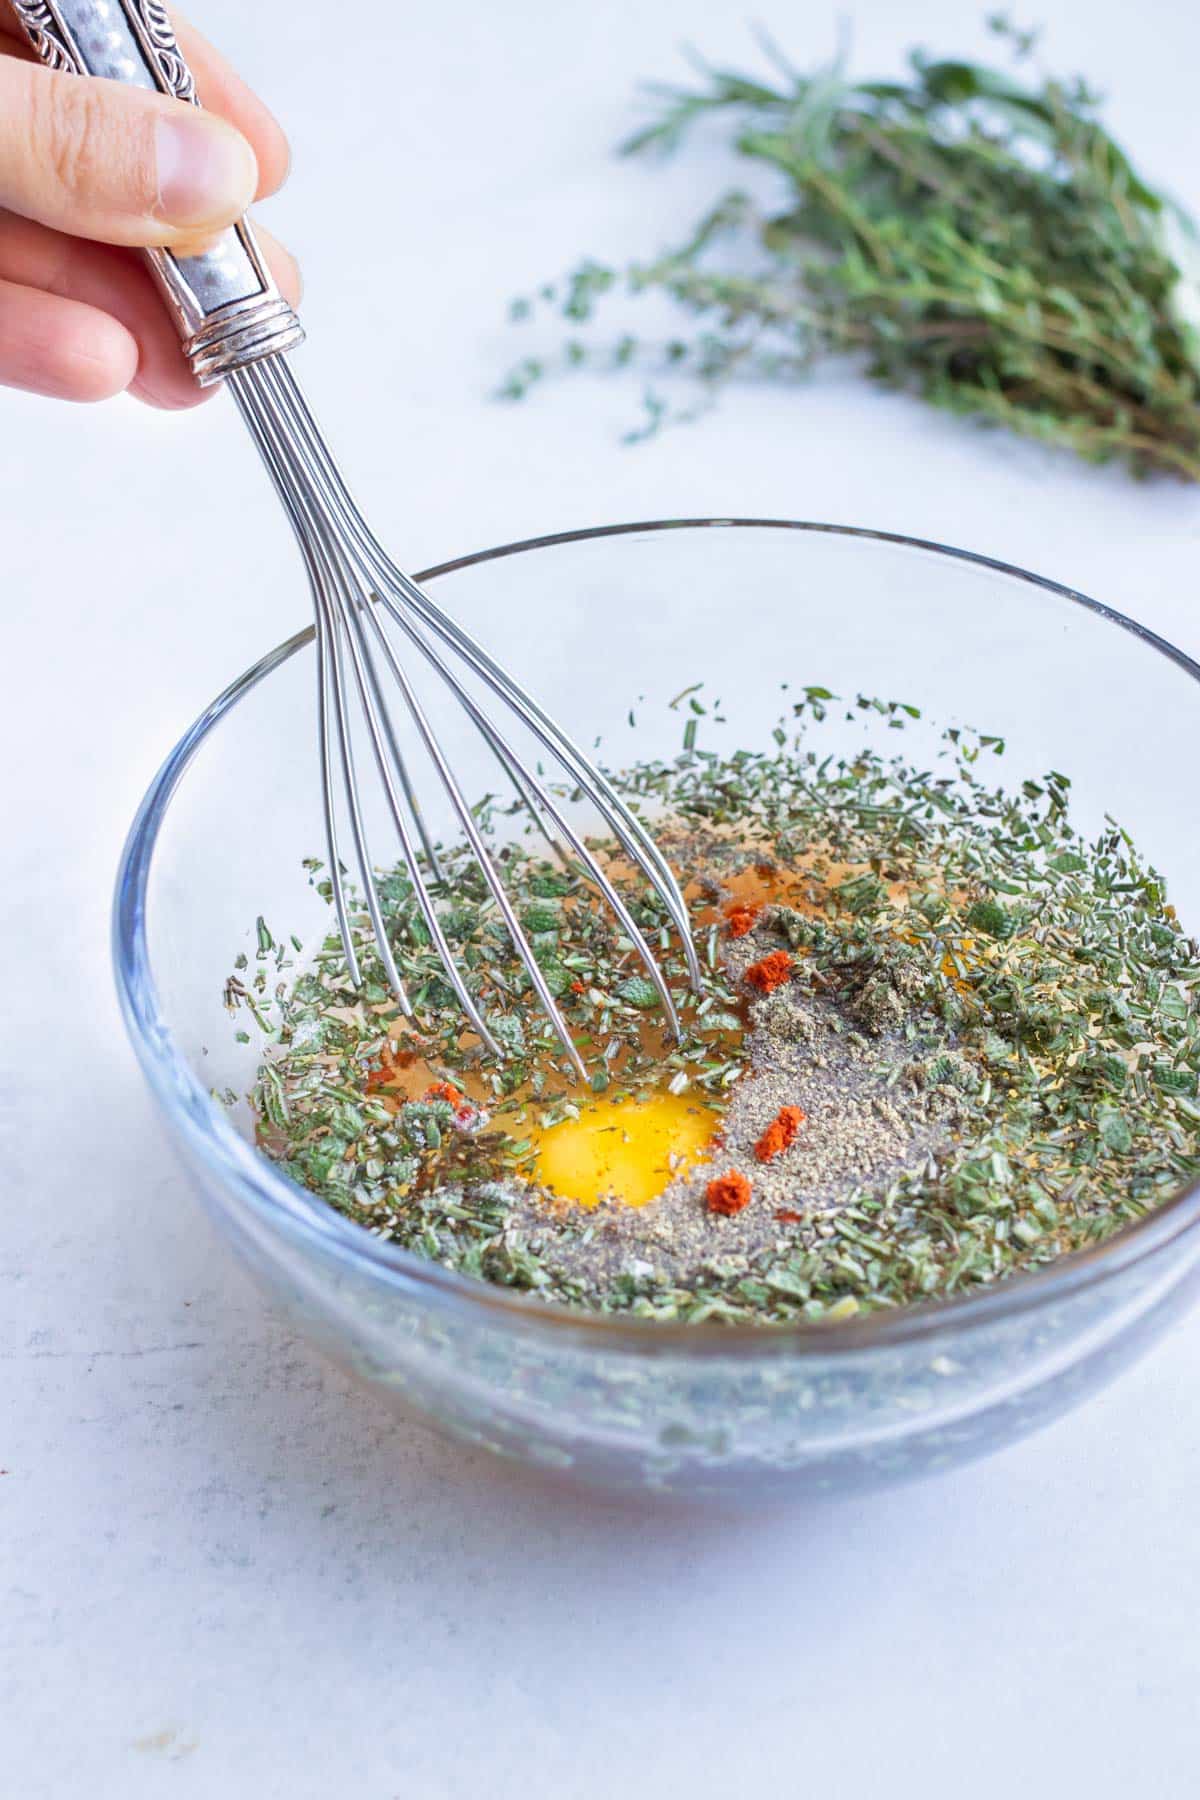 Eggs, spices, herbs, and chicken broth are whisked together in a glass bowl.